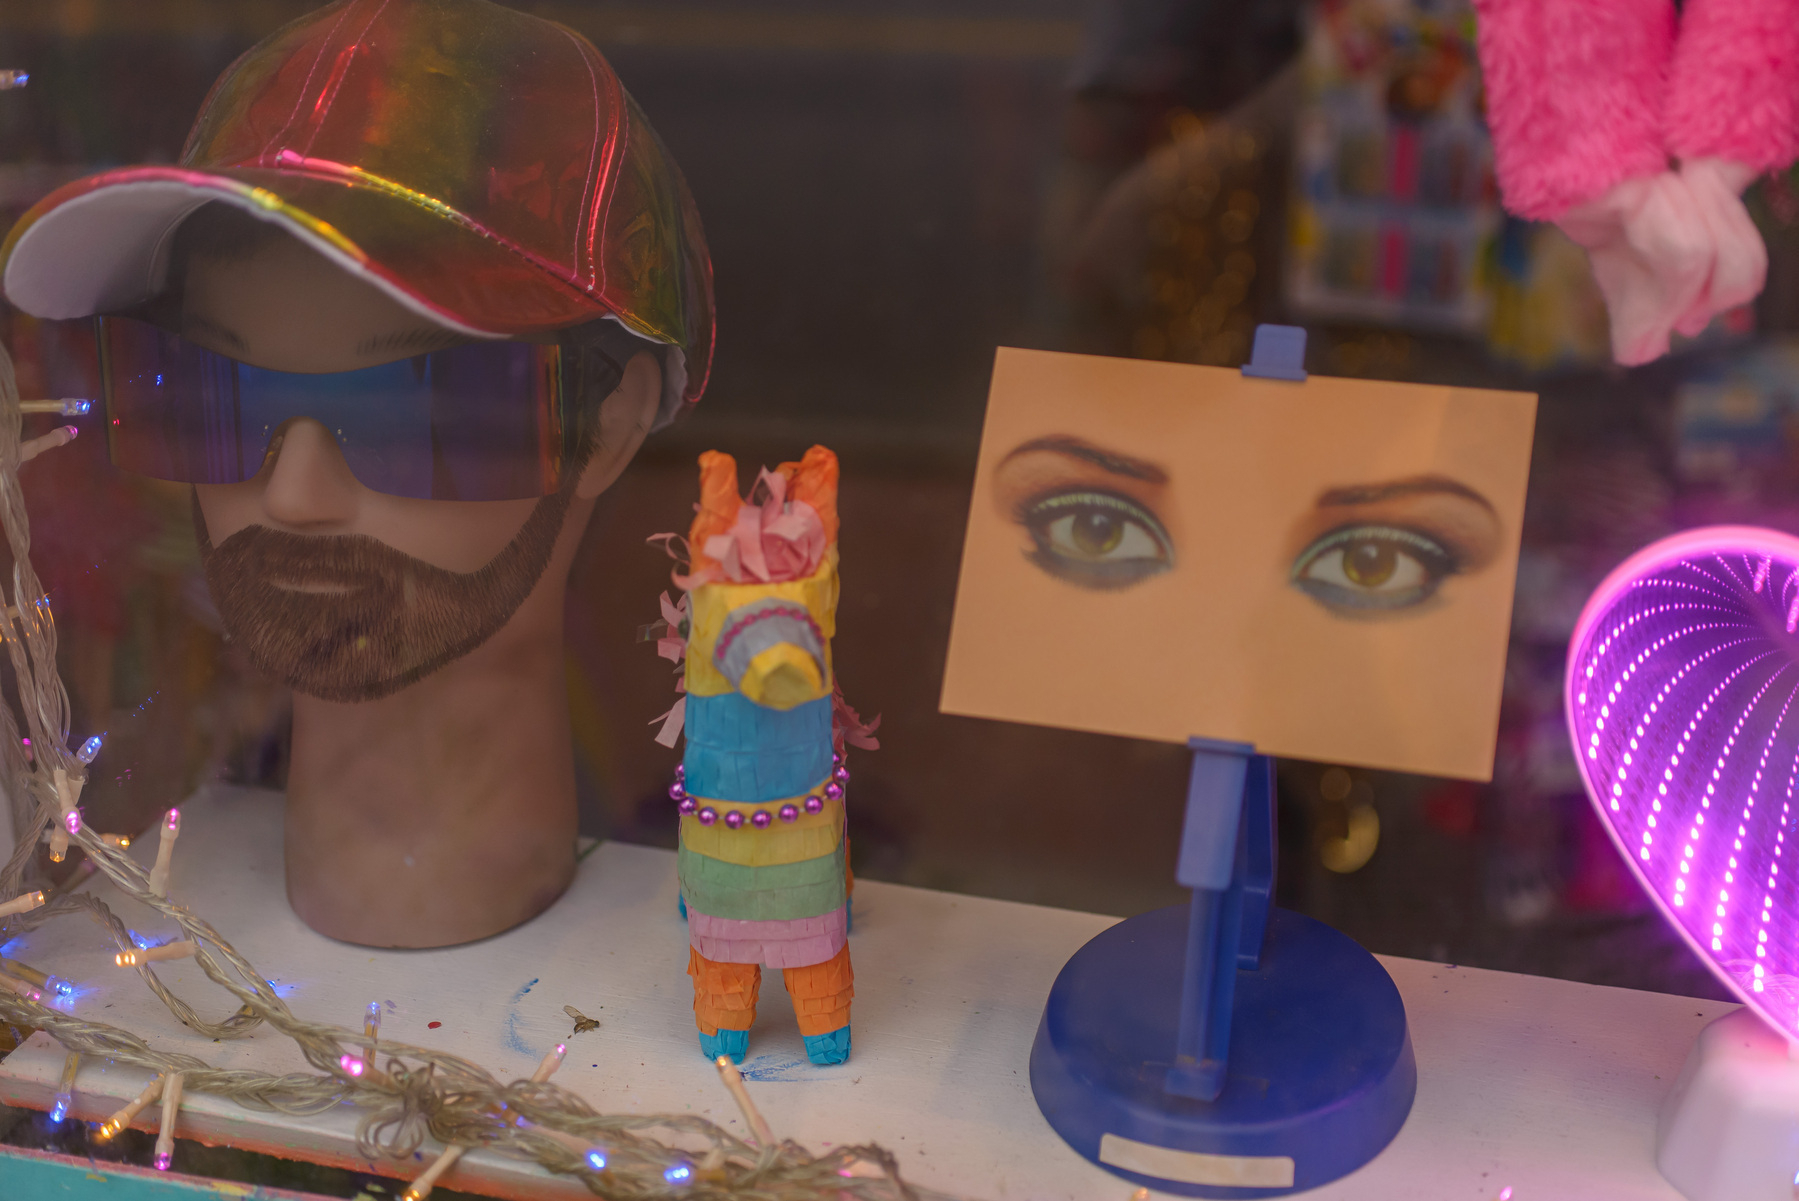 display in shop window with women’s eyes looking out from a rectangular card